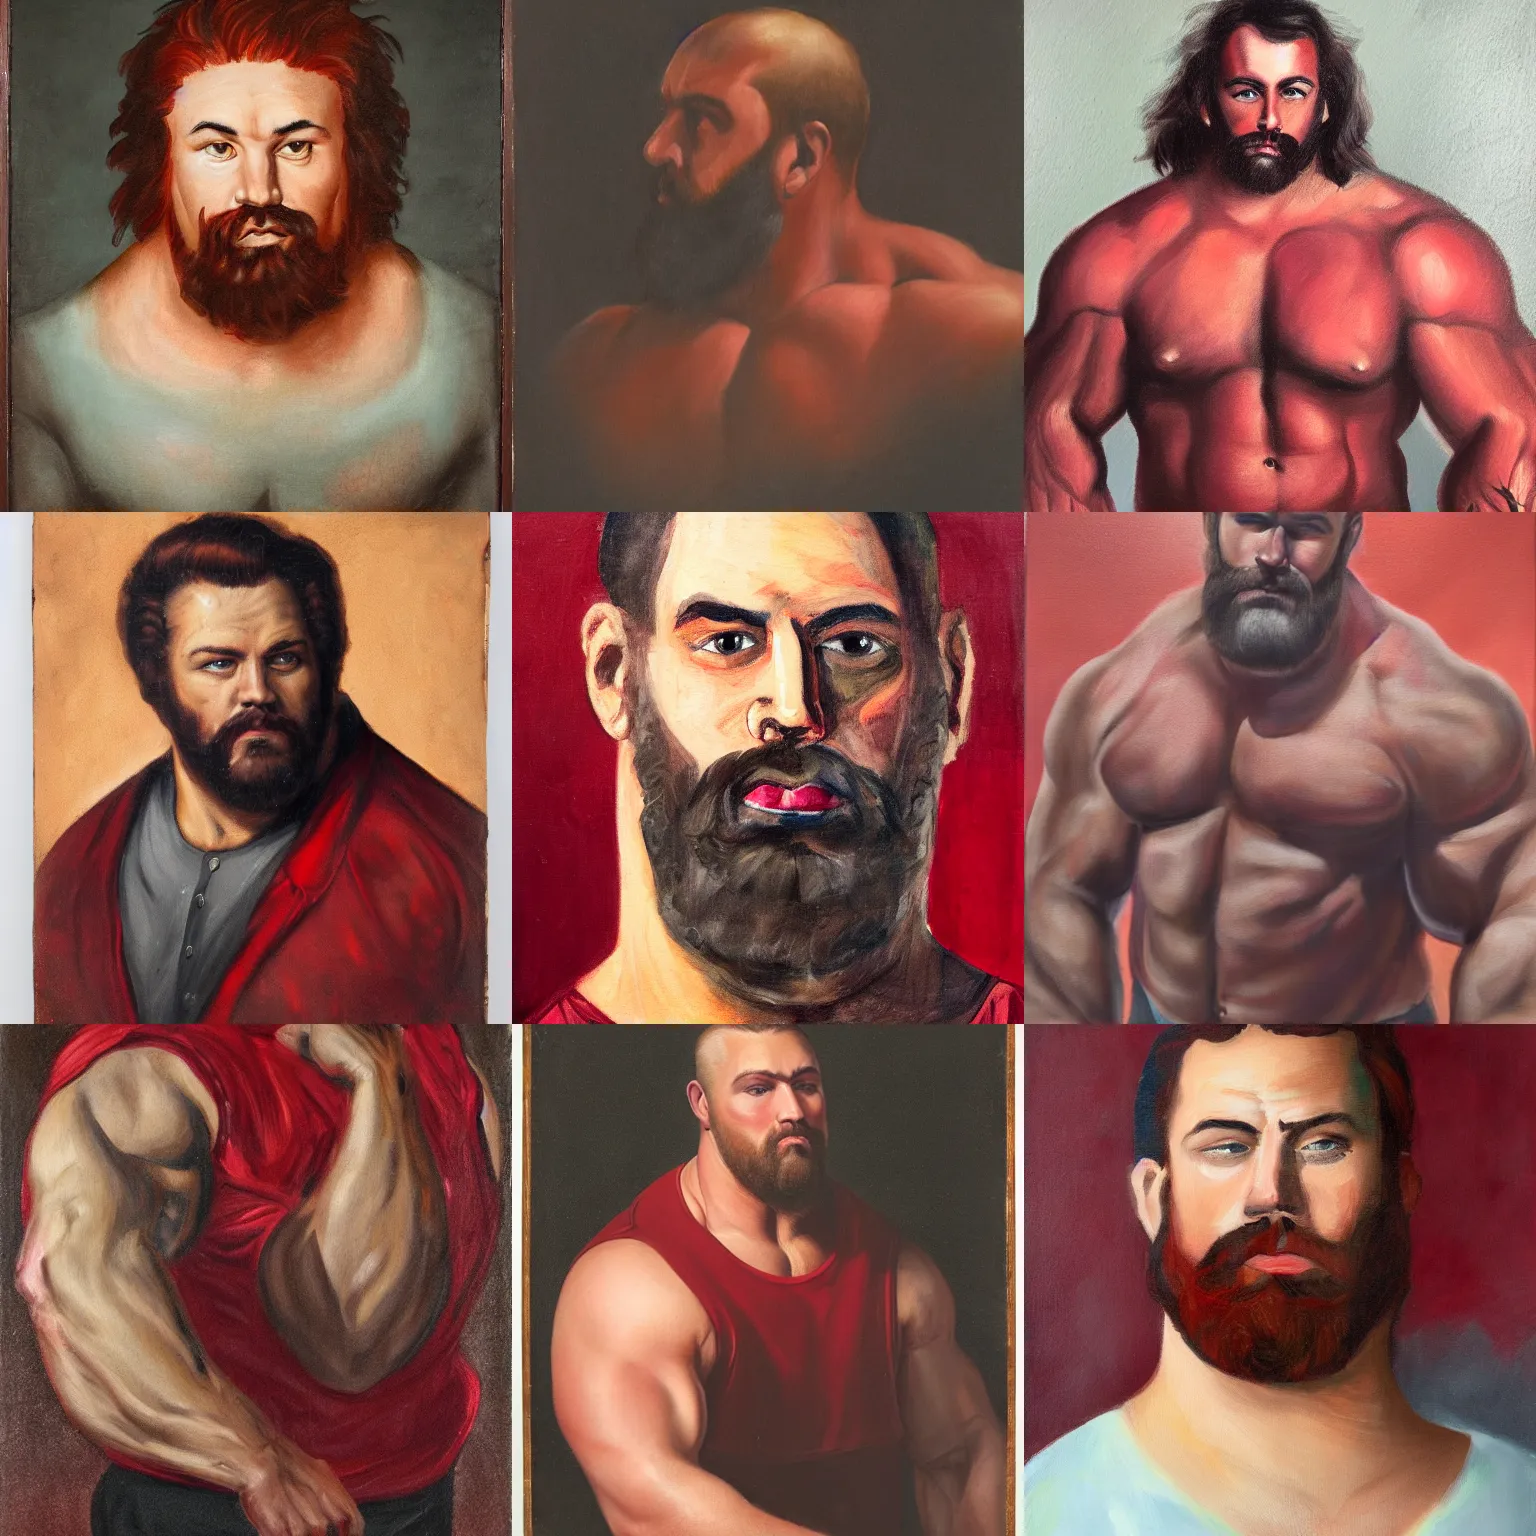 Prompt: painted portrait of a burly muscular man with dark red curled hair